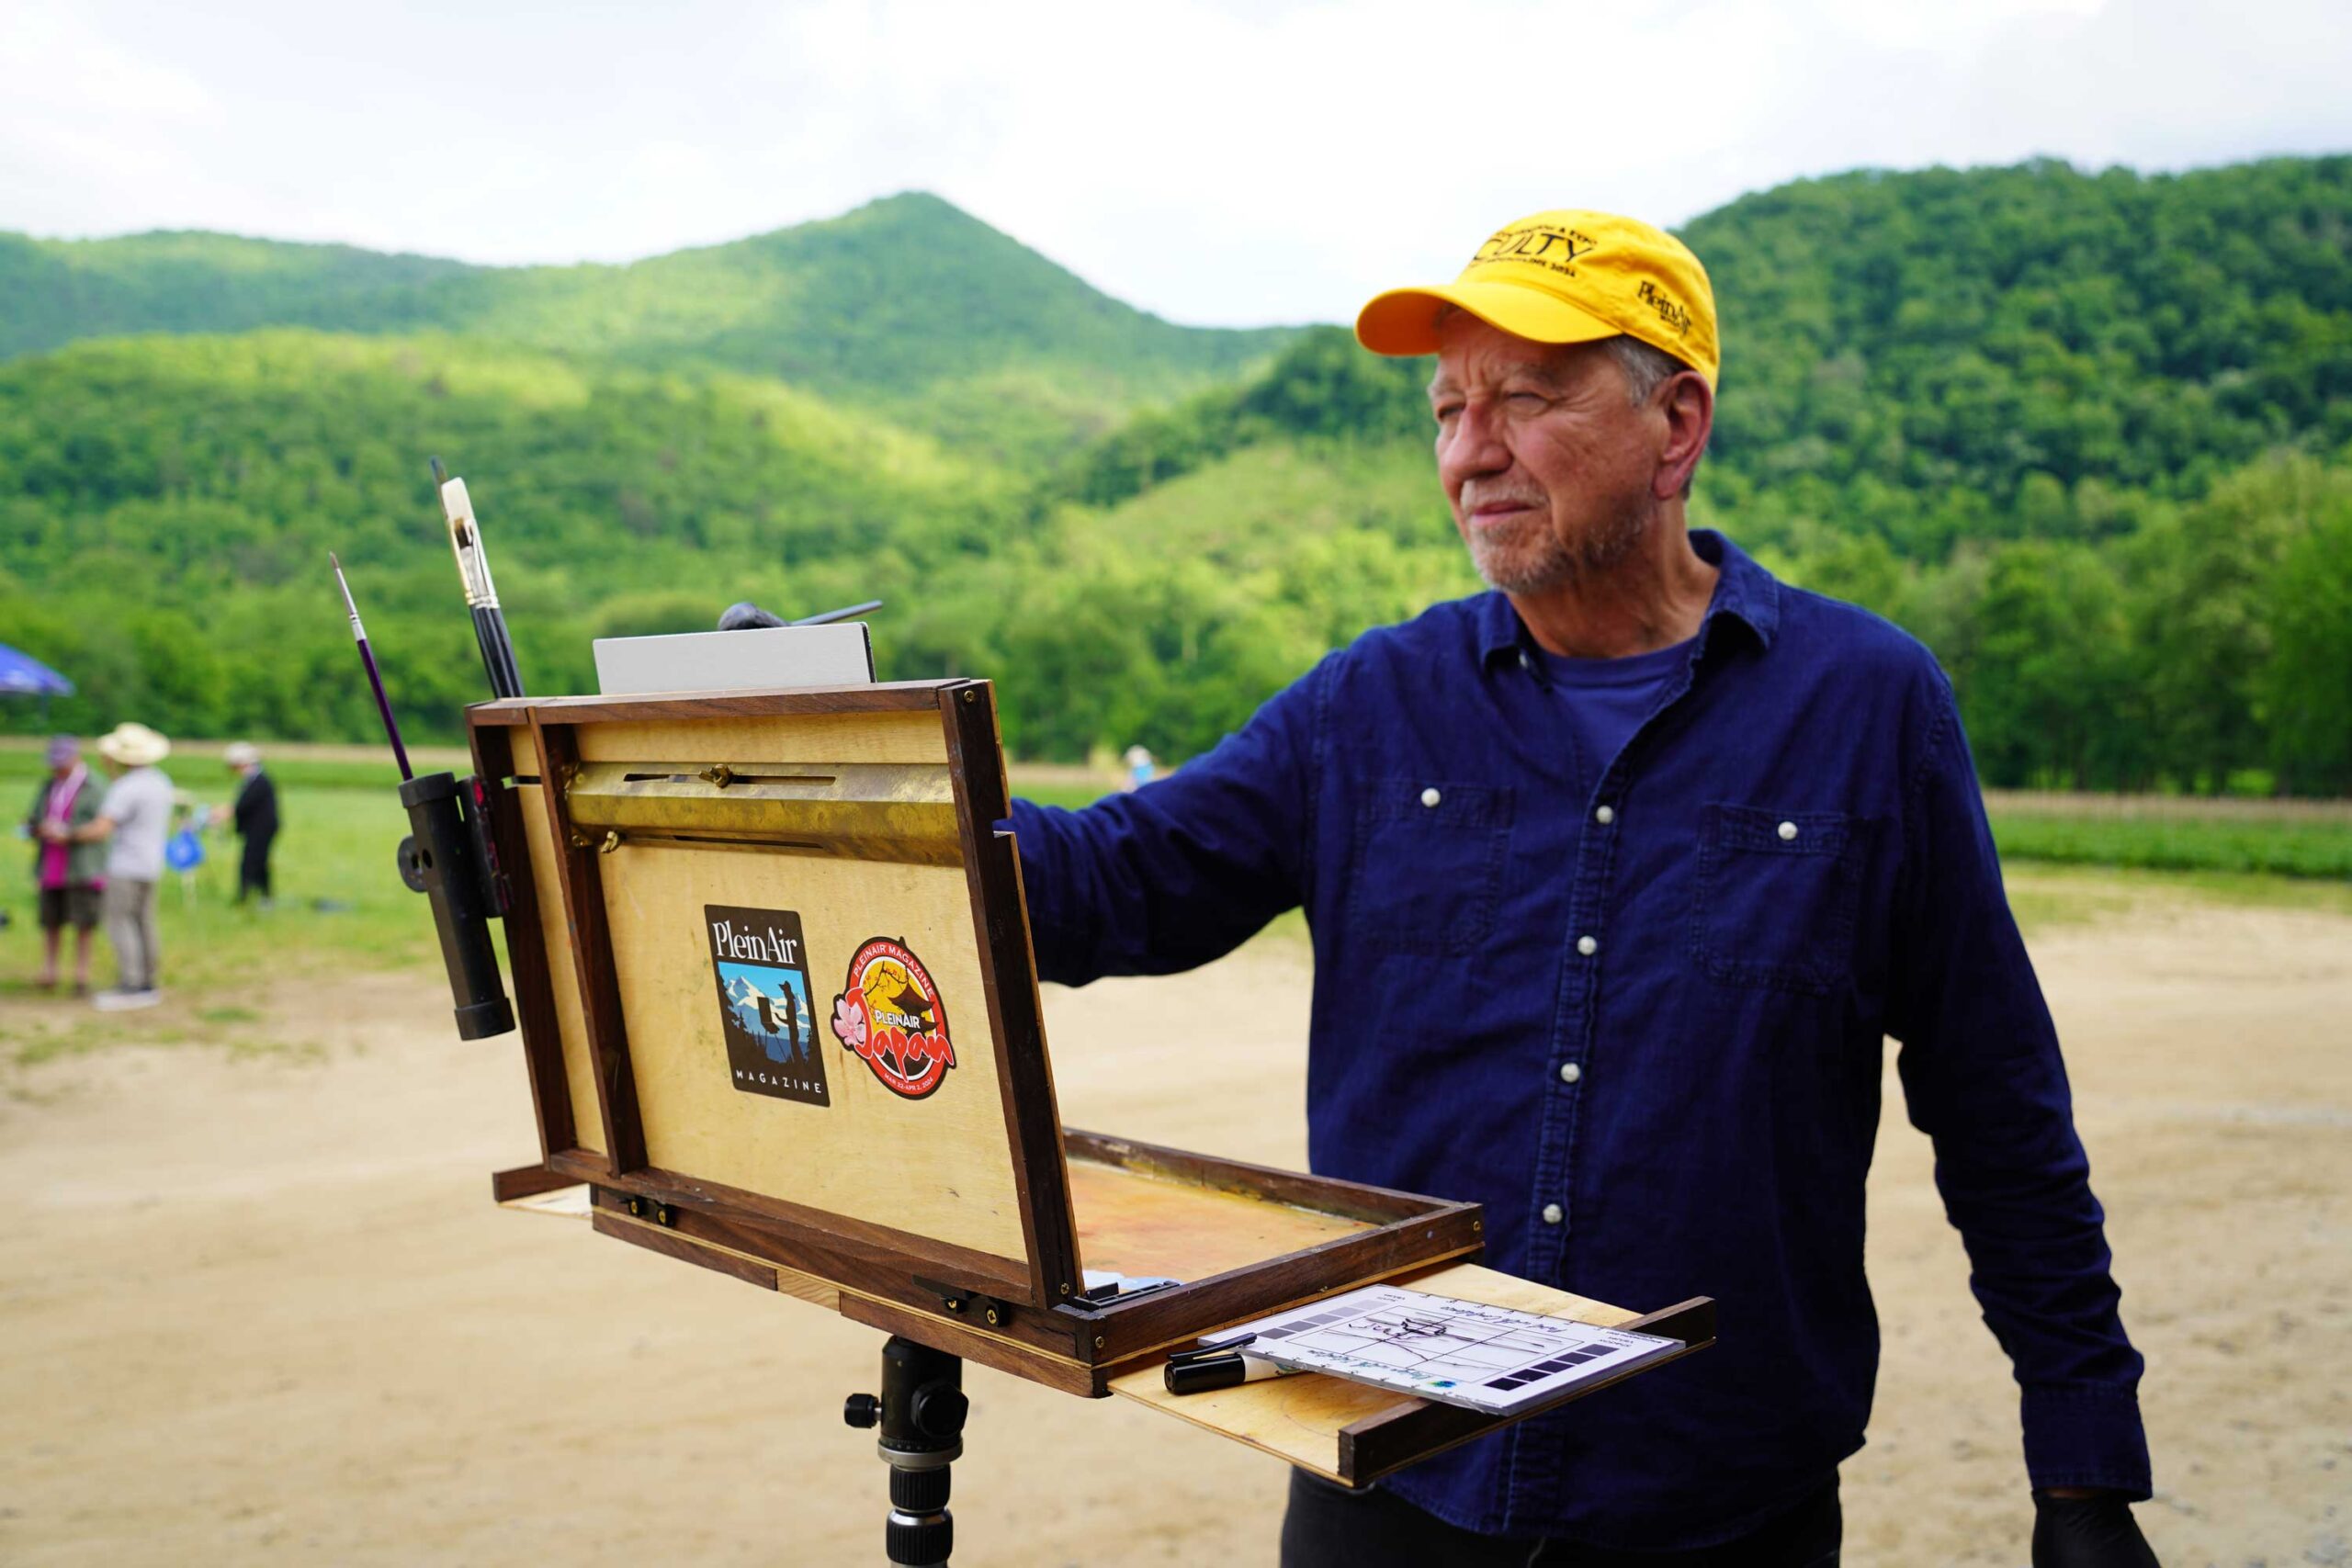 Our host and CEO, Eric Rhoads also set up an easel to paint at Darnell Farms.